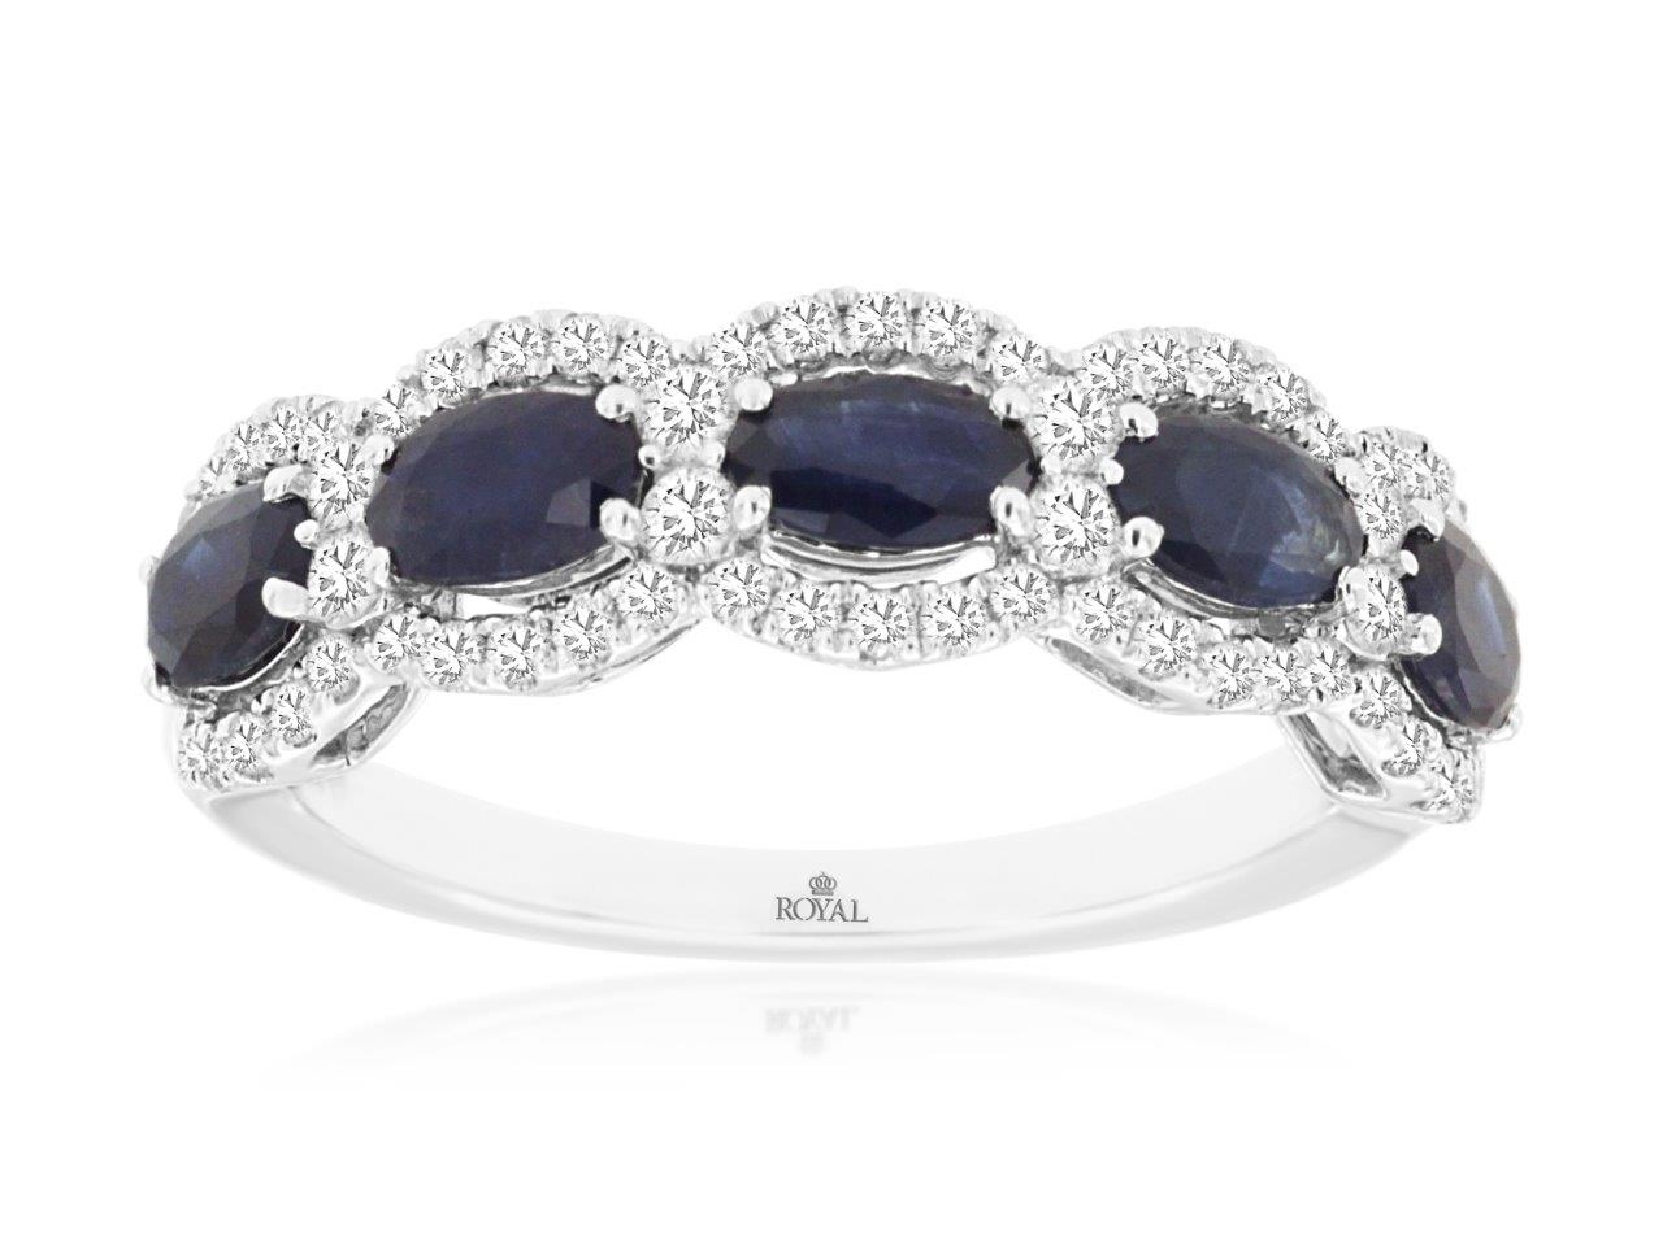 14K White Gold Band with Oval Sapphires and Diamond Halos Size 7